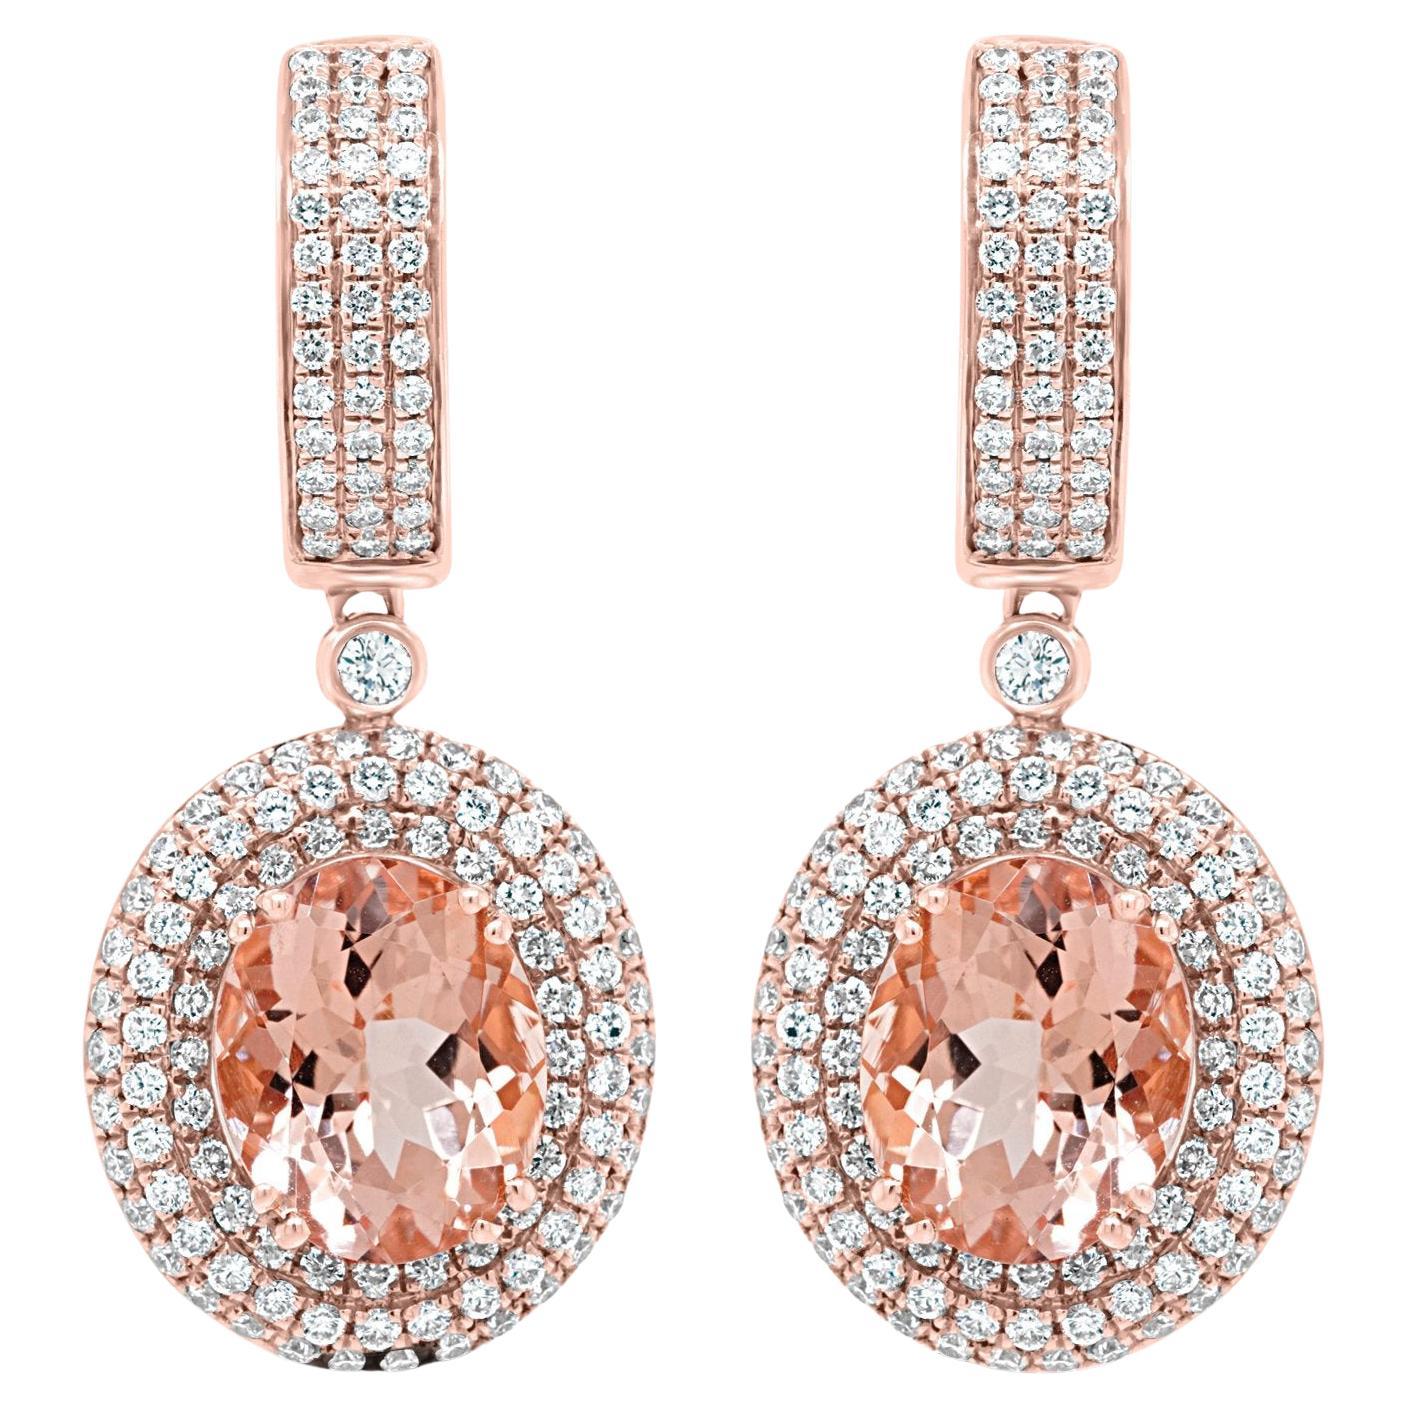 7.02ct Morganite Earring with 1.97ct Diamonds Set in 14K Rose Gold For Sale